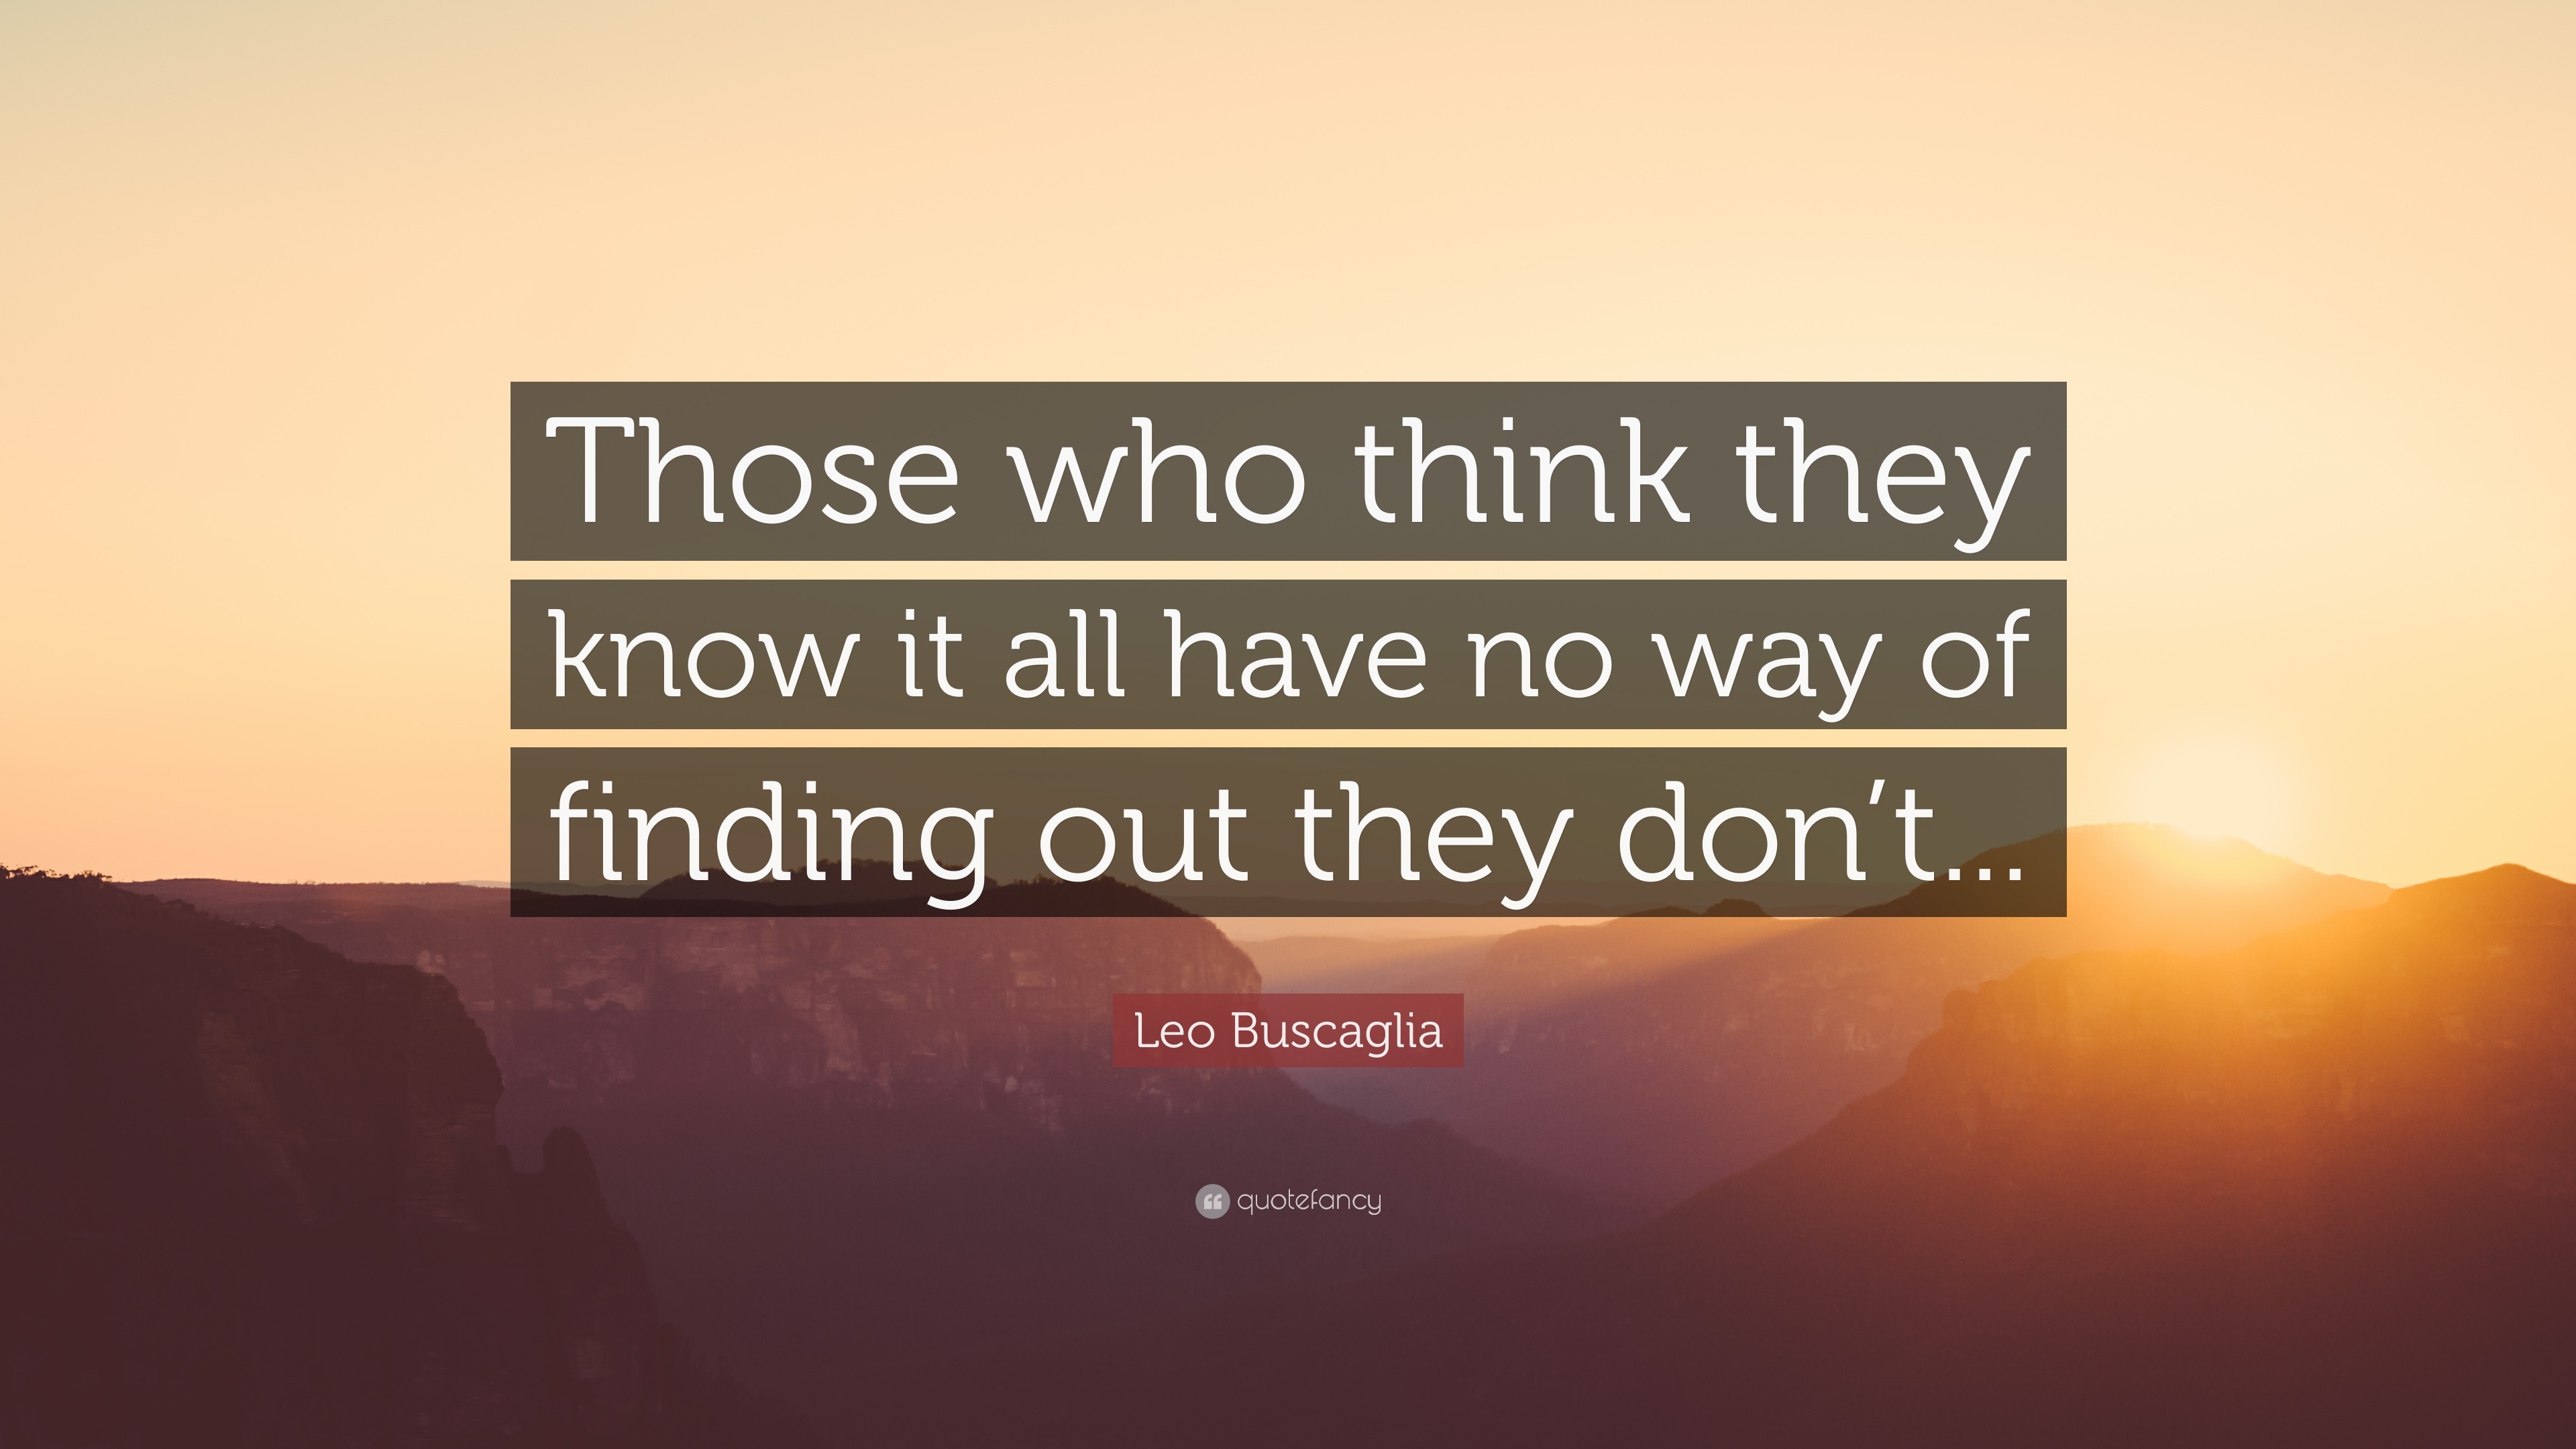 Leo Buscaglia Quote: “Those who think they know it all have no way of ...